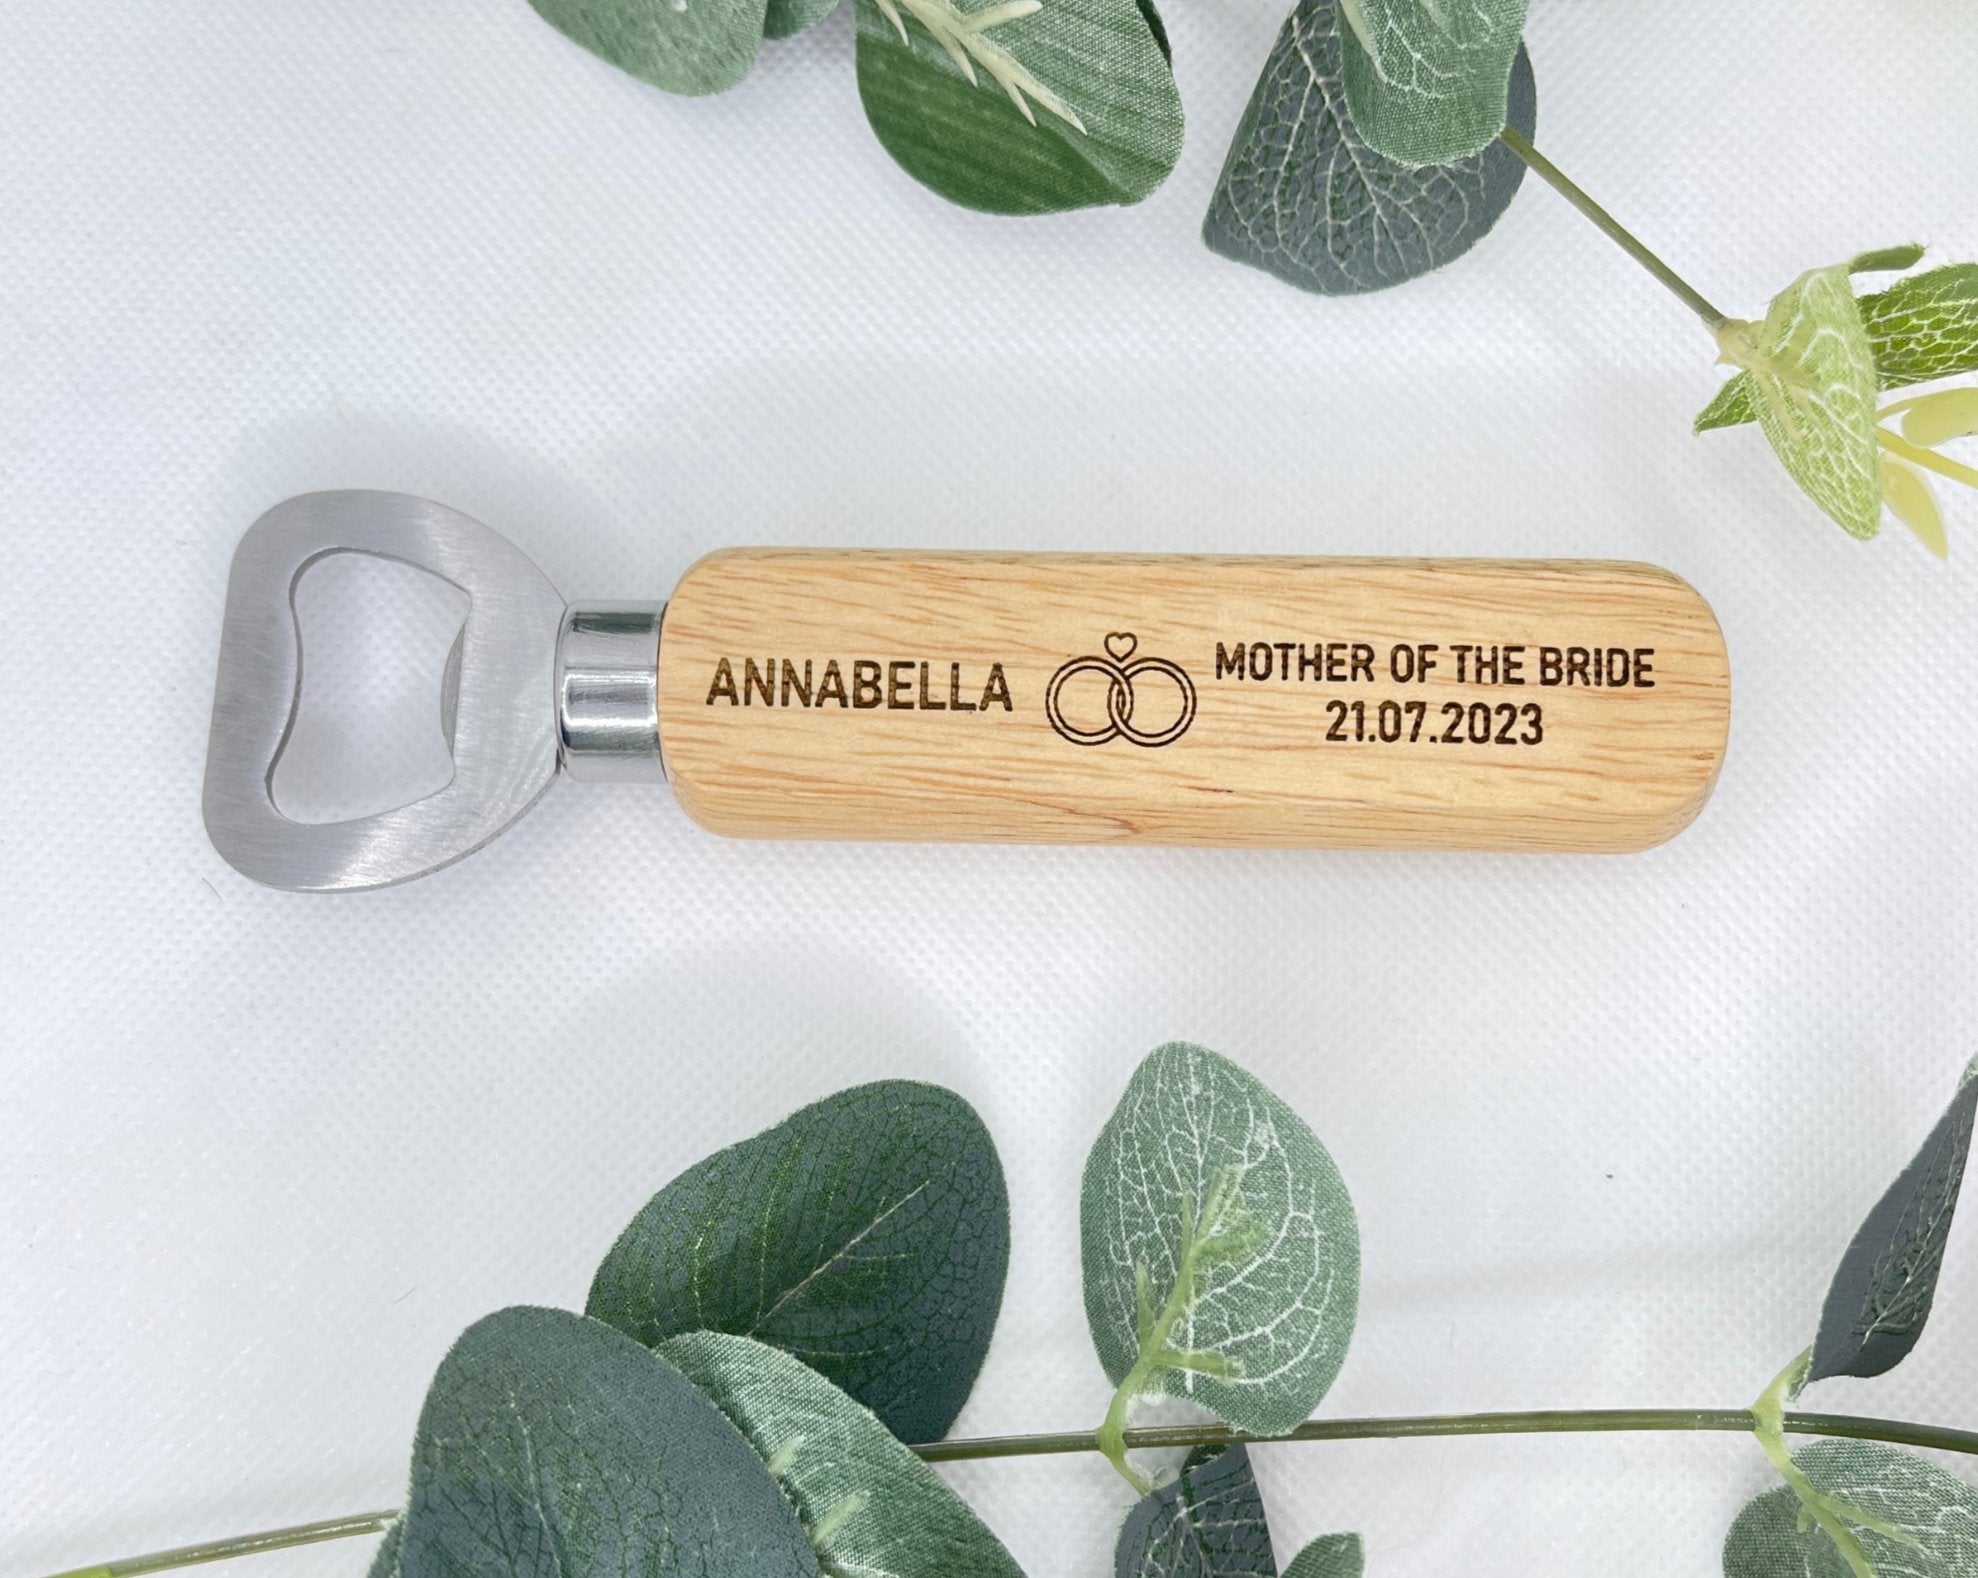 Bottle opener personalise with name at the left hand side, right role of wedding & date under. in the middle there is a picture of two rings & a heart on top. Perfect for wedding gifts. Bridesmaids with a girly touch.   